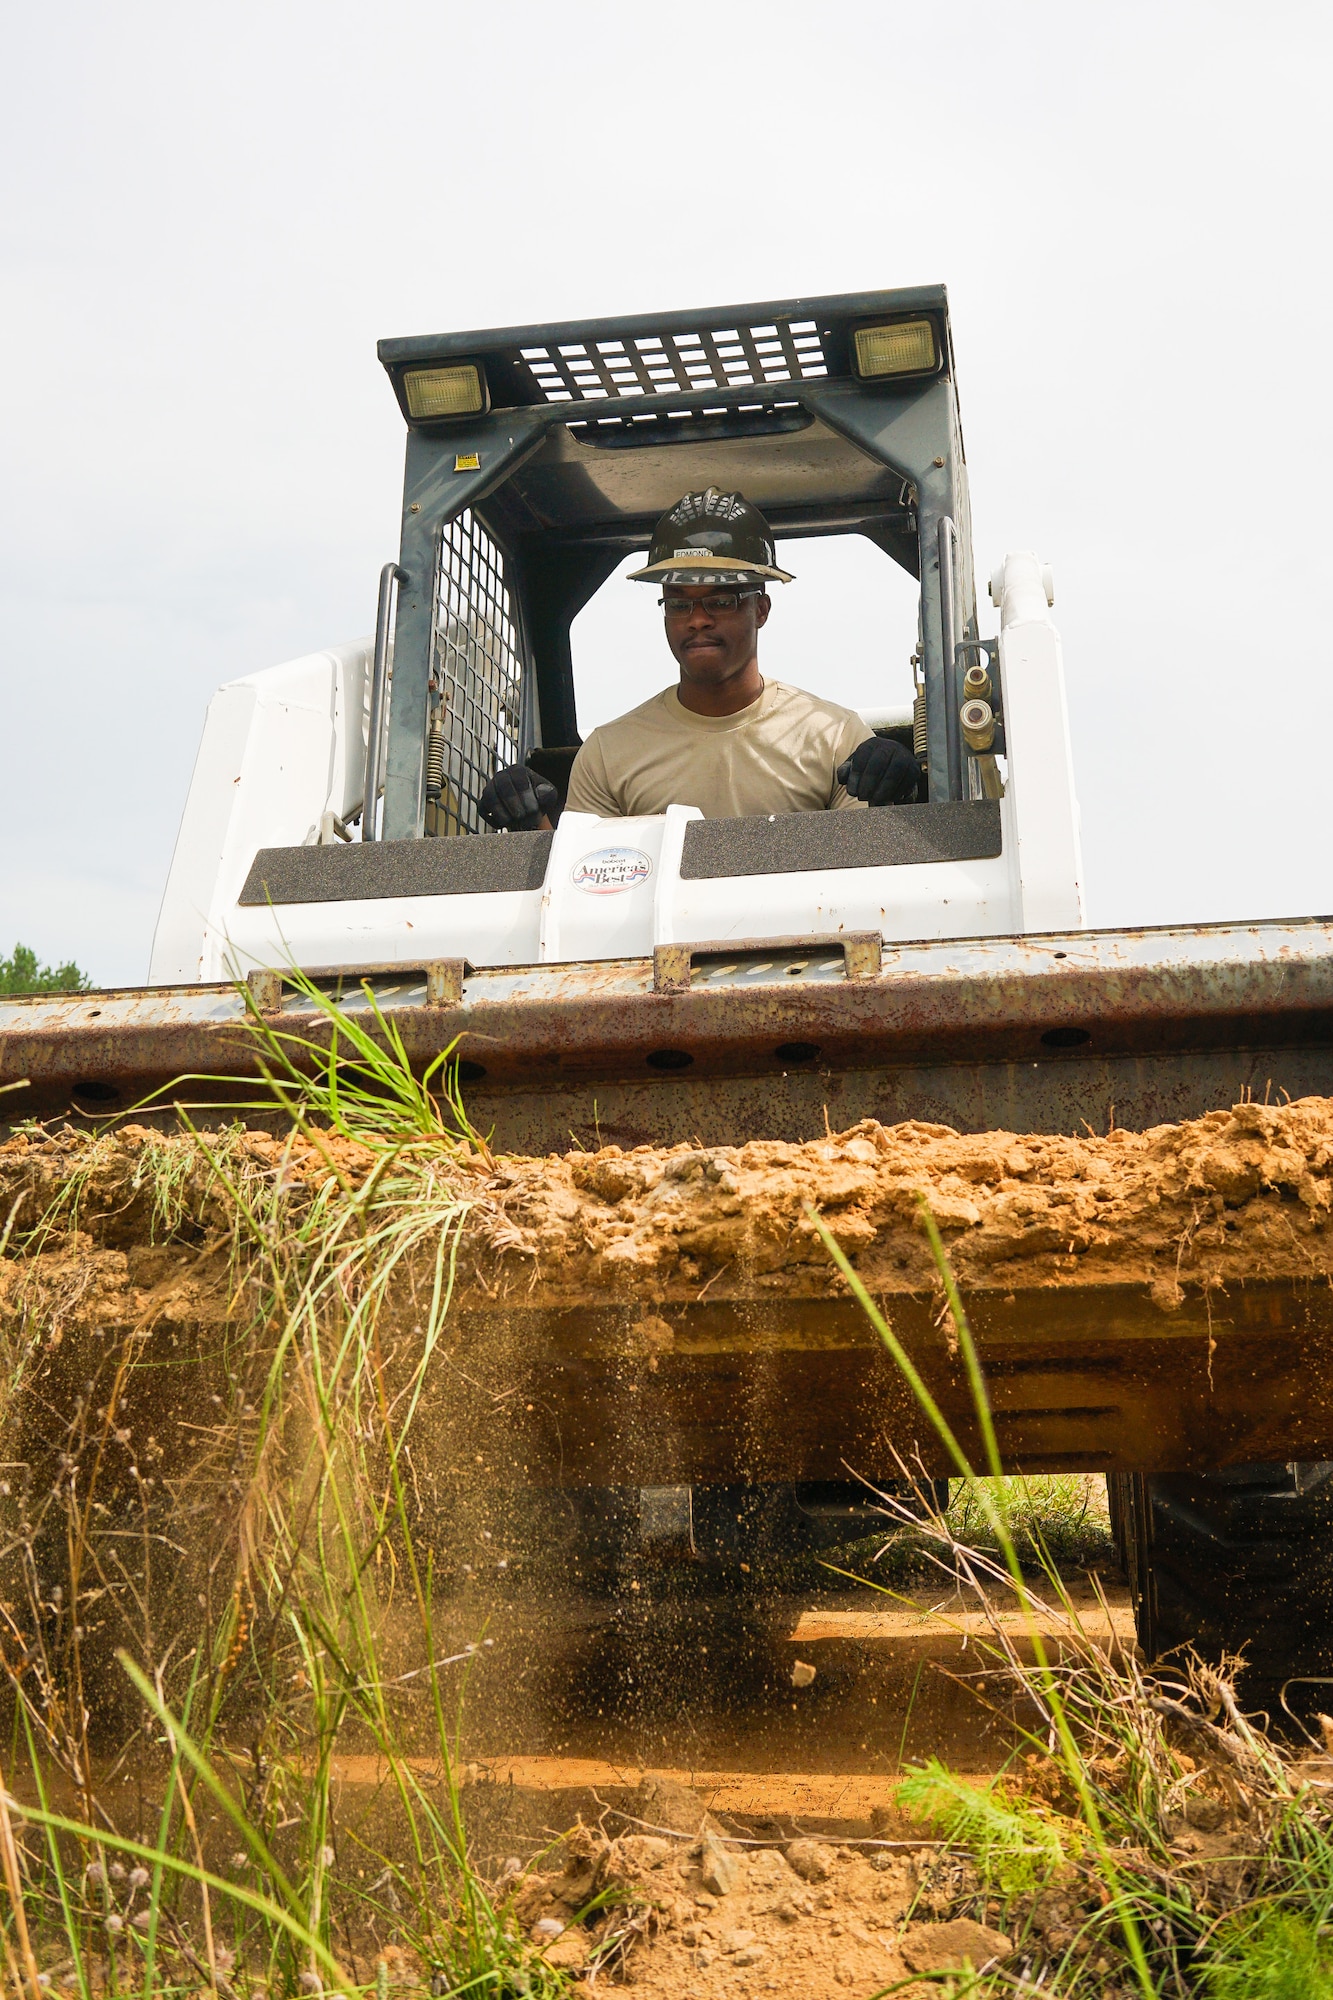 U.S. Air Force Senior Airman Ramirez Edmond, a cable and antenna systems specialist with the 202nd Engineering Installation Squadron (EIS), Georgia Air National Guard, removes dirt from a berm using a Bobcat during a weeklong training exercise at Robins Air Force Base, Ga., June 11, 2015. More than 80 Airmen were certified in career-field tasks crucial to the unit’s deployed and homeland missions. The 202nd EIS supports the 116th Air Control Wing and is responsible for the fixed-communications infrastructures for 27 other locations, including the 165th Airlift Wing in Savannah, Georgia, and Air National Guard units in Puerto Rico and the U.S. Virgin Islands. (U.S. Air National Guard photo by Senior Master Sgt. Roger Parsons/Released)